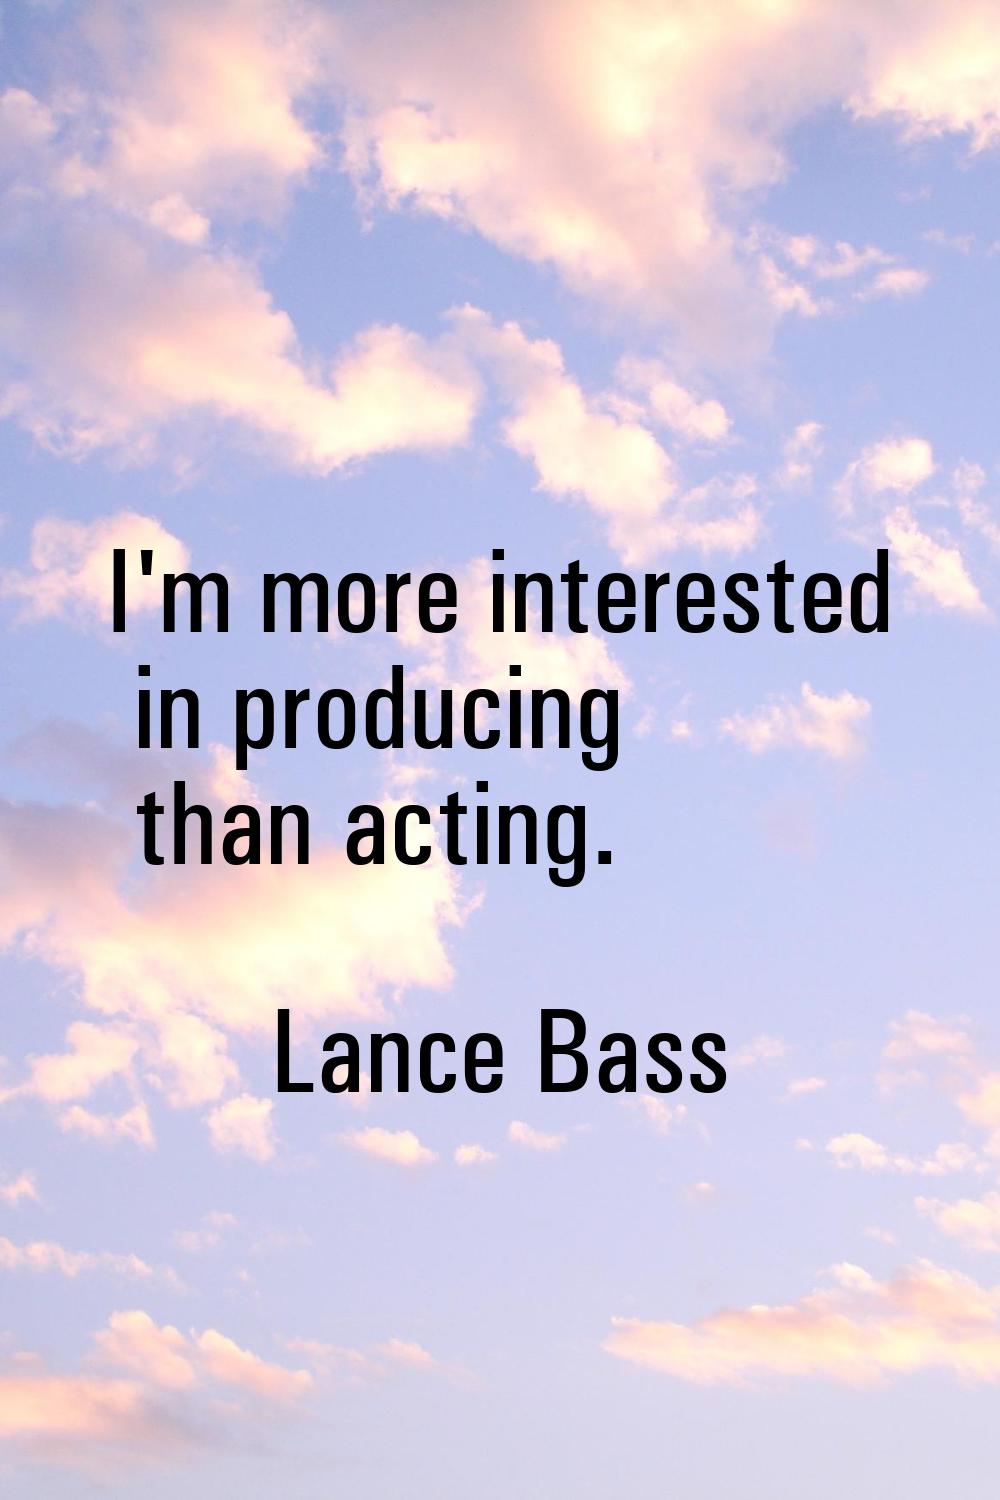 I'm more interested in producing than acting.